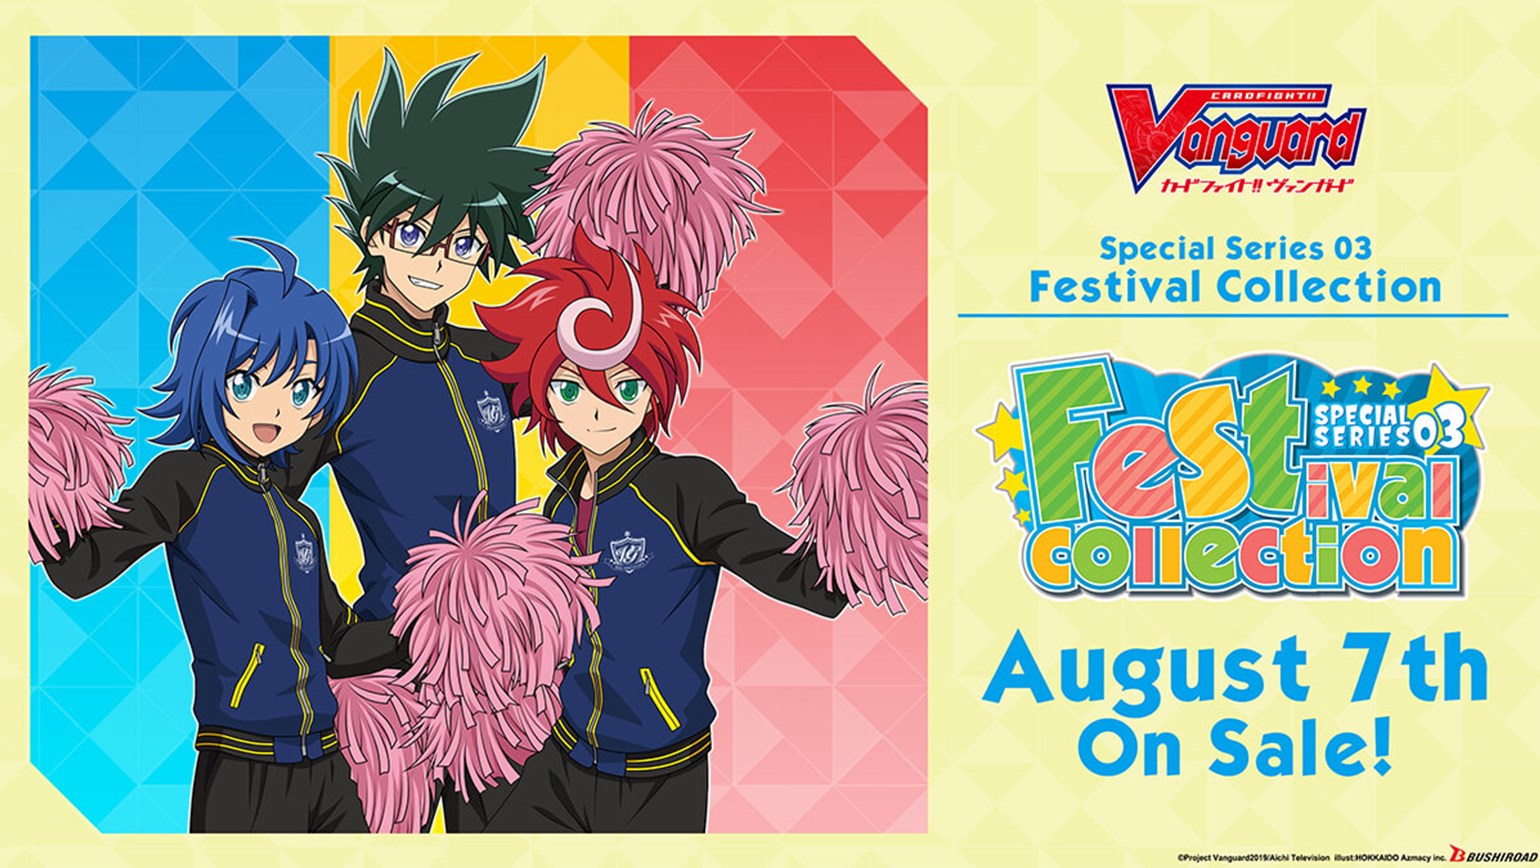 English Edition Cardfight!! Vanguard Special Series 03 “Festival Collection” Coming August 7th